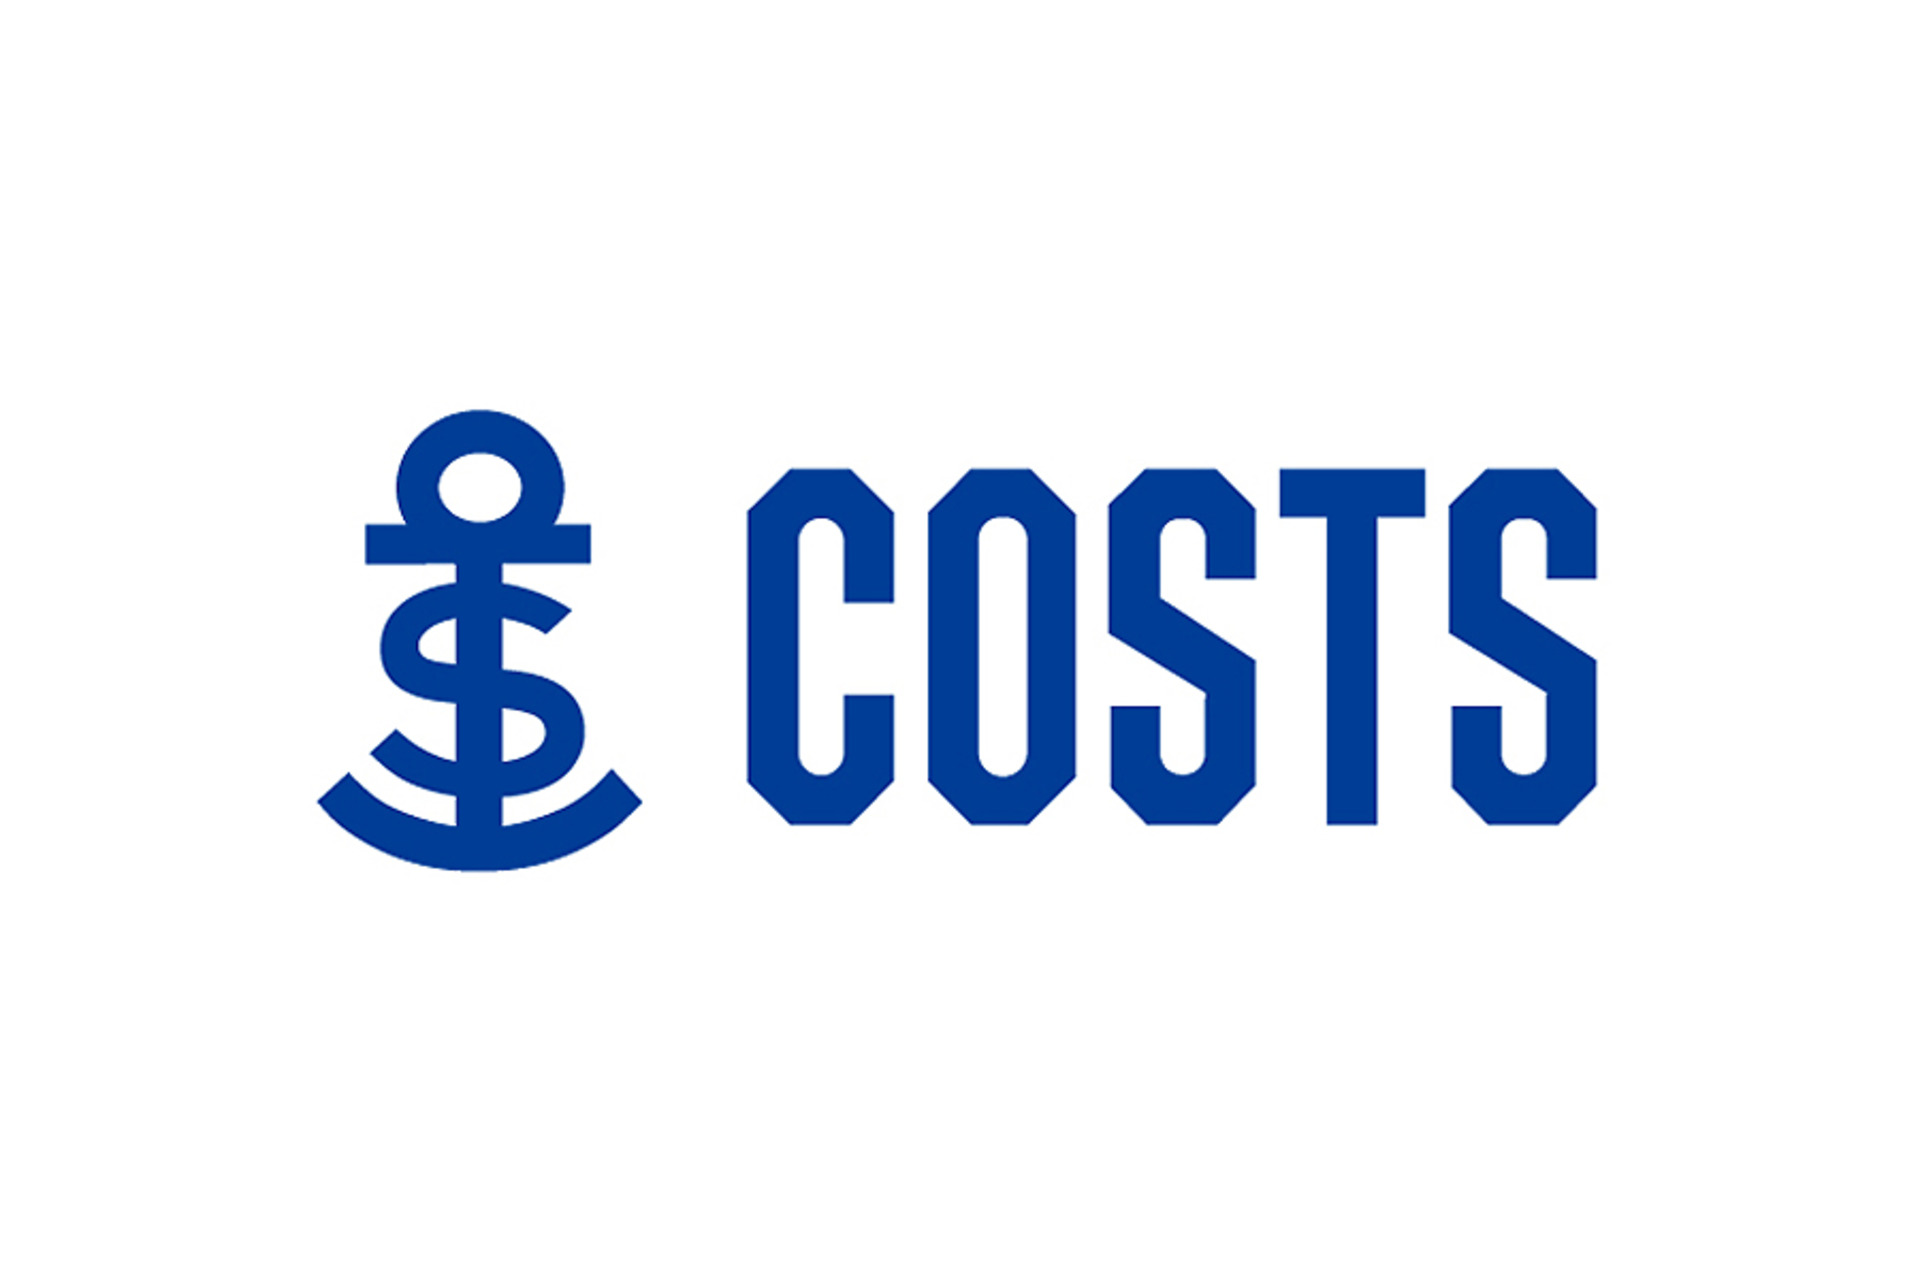 COSTS